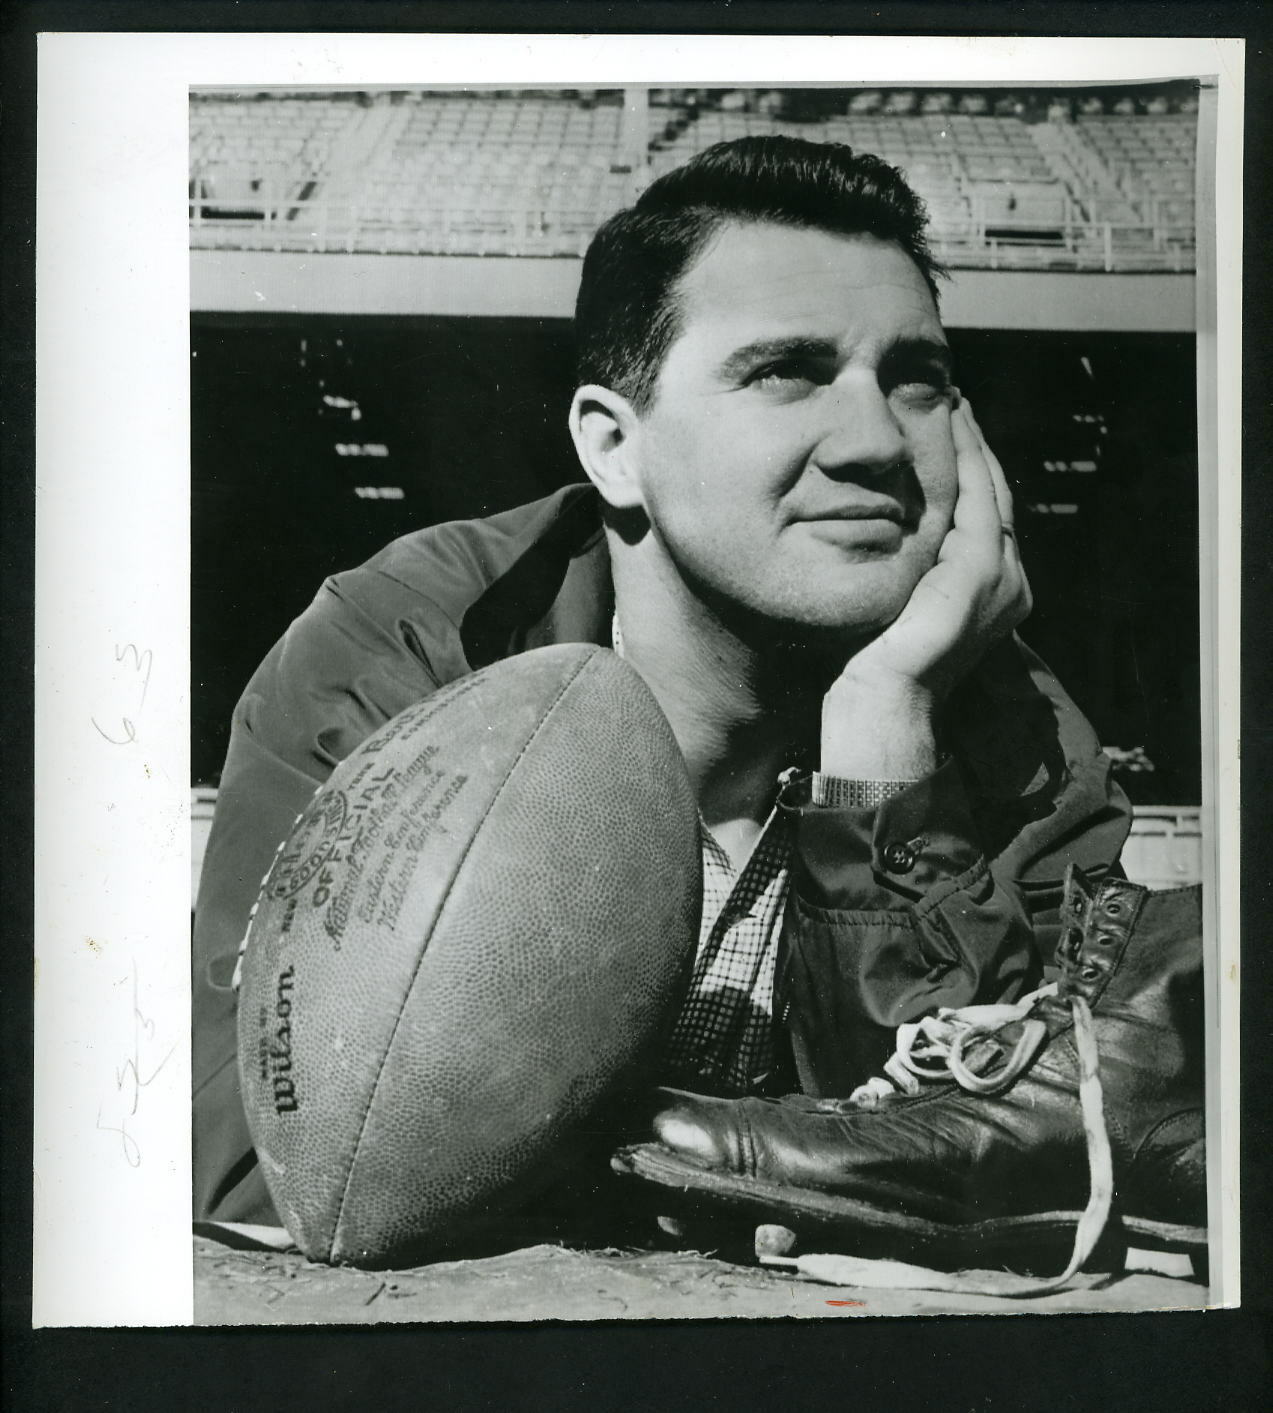 Pat Summerall 1958 Type 1 Press Photo Poster painting New York Giants vs. Colts NFL Championship